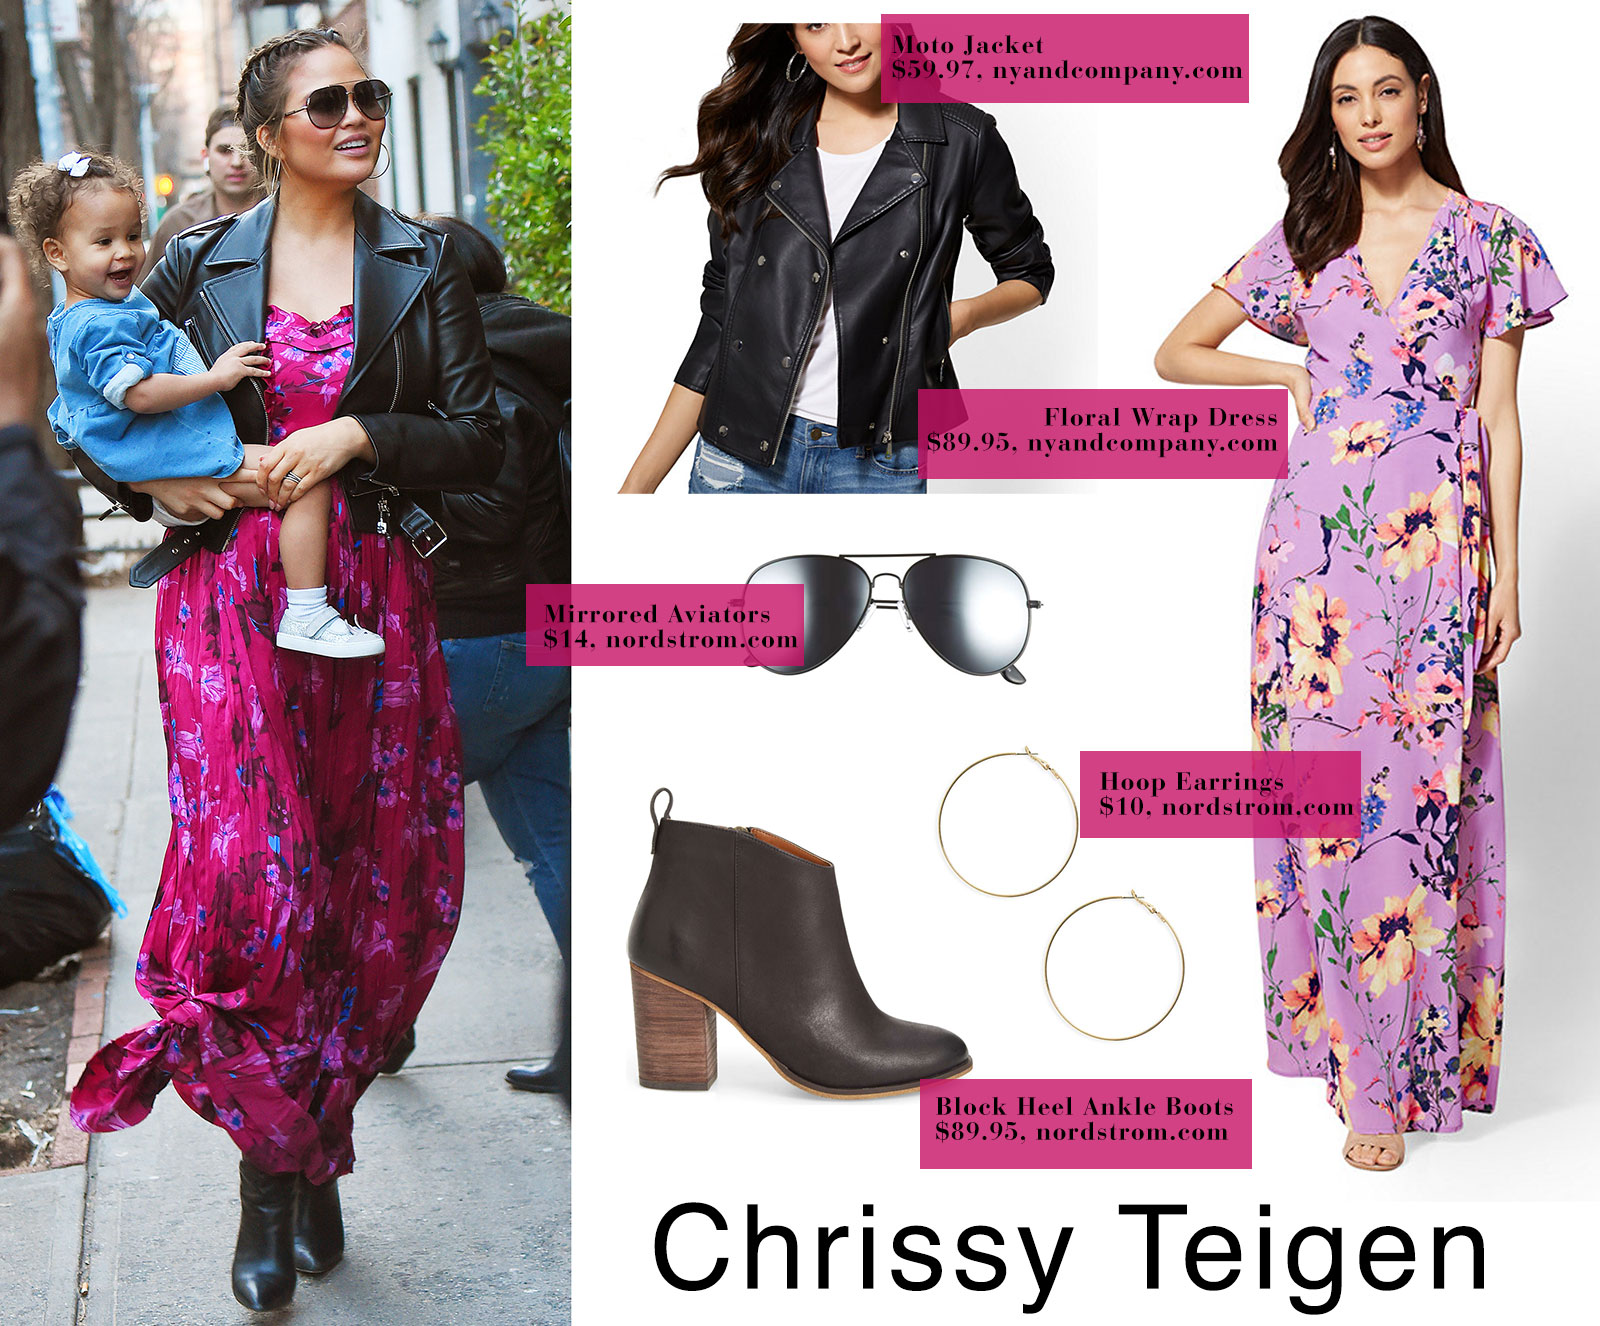 Chrissy Teigen's pregnancy style featuring floral maxi dress and black leather moto jacket